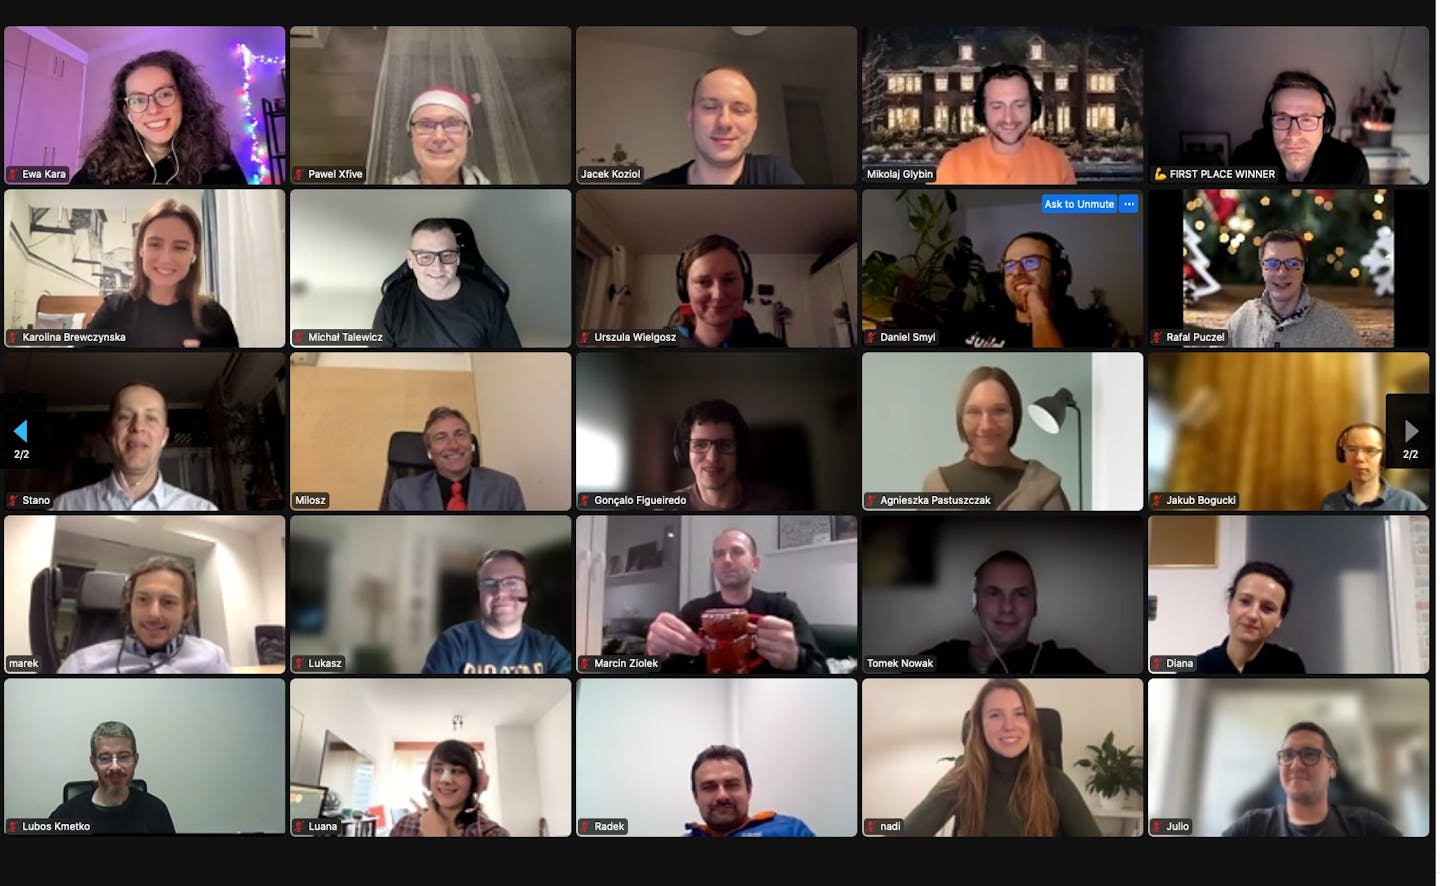 Screenshot of a Zoom call presenting 25 employees of Xfive Digital Products Agency.